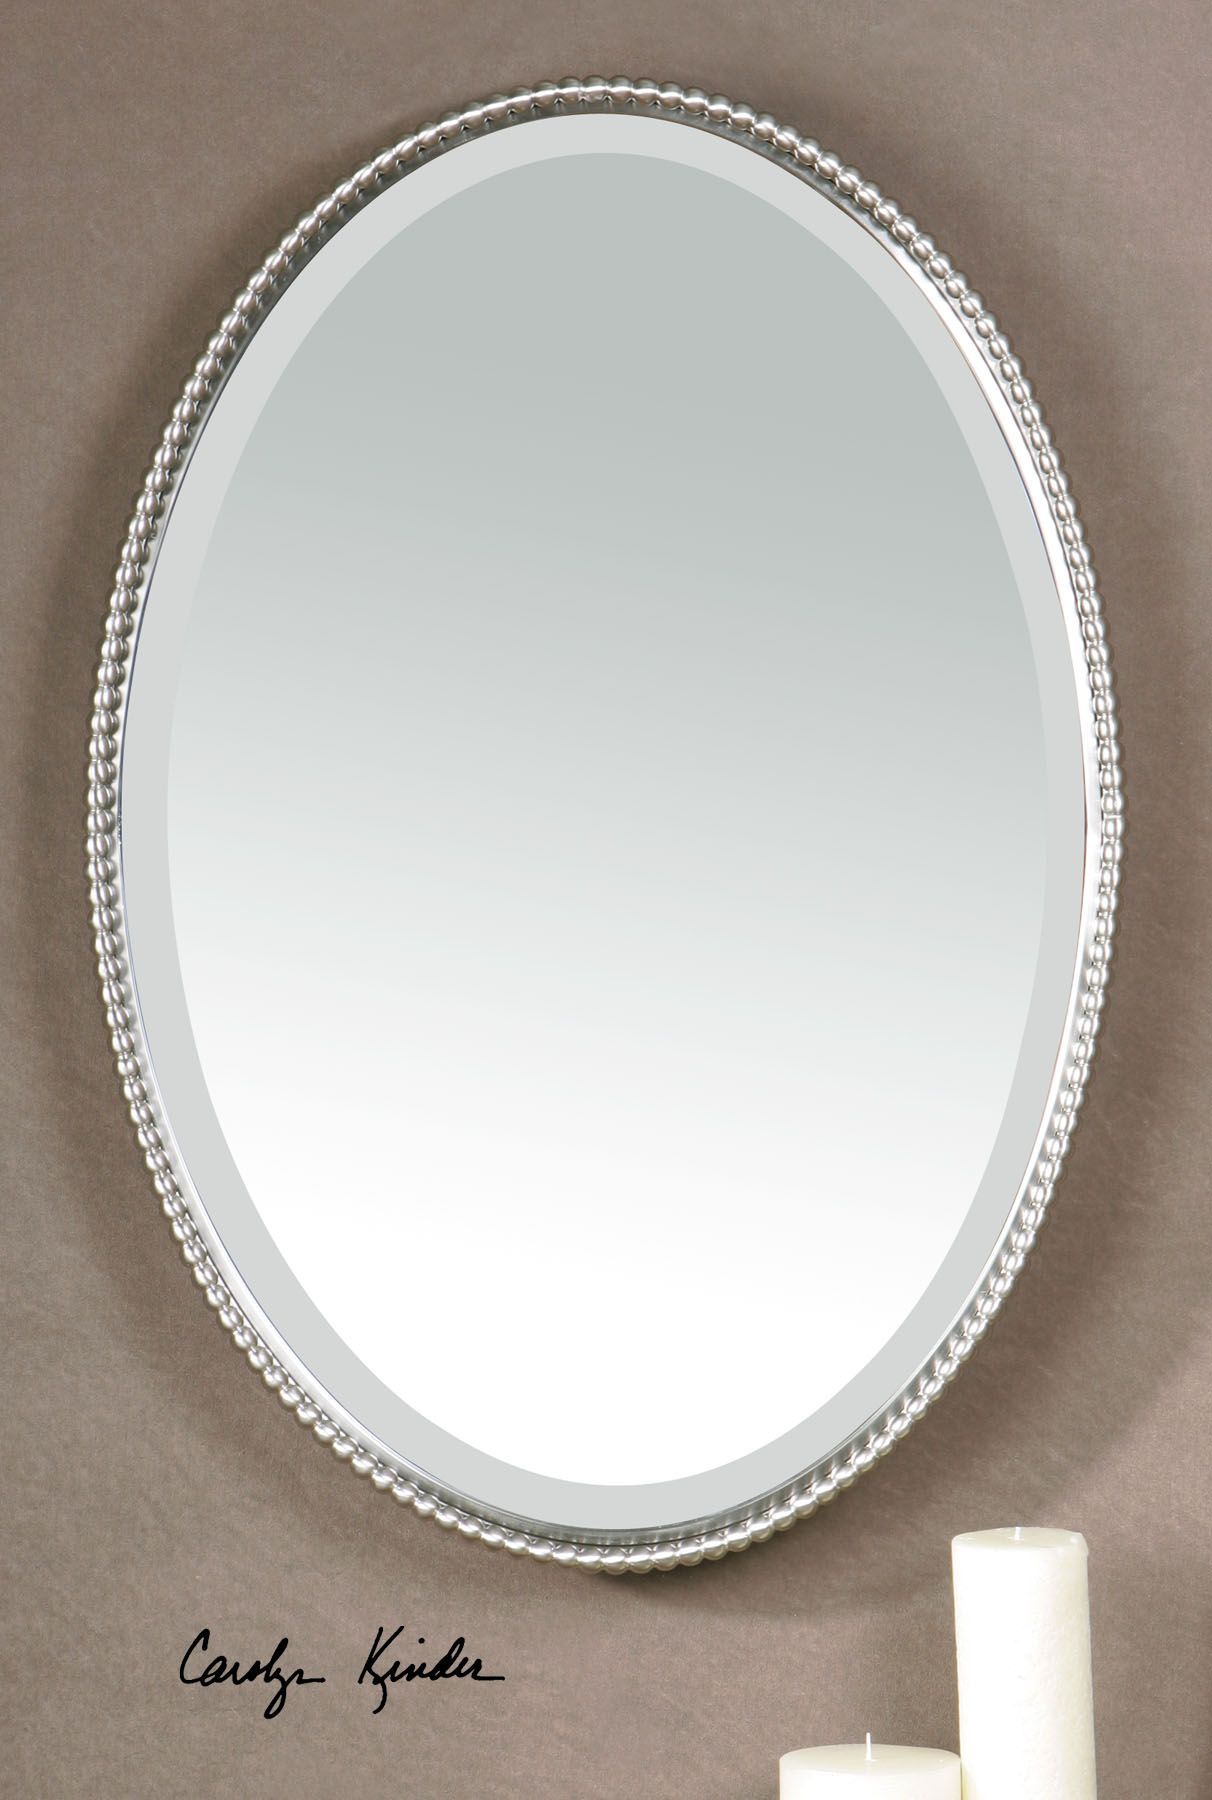 Silver Nickel Beaded Edge Oval Wall Mirror 32" Vanity Bathroom Horchow Pertaining To Round Beaded Trim Wall Mirrors (View 2 of 15)